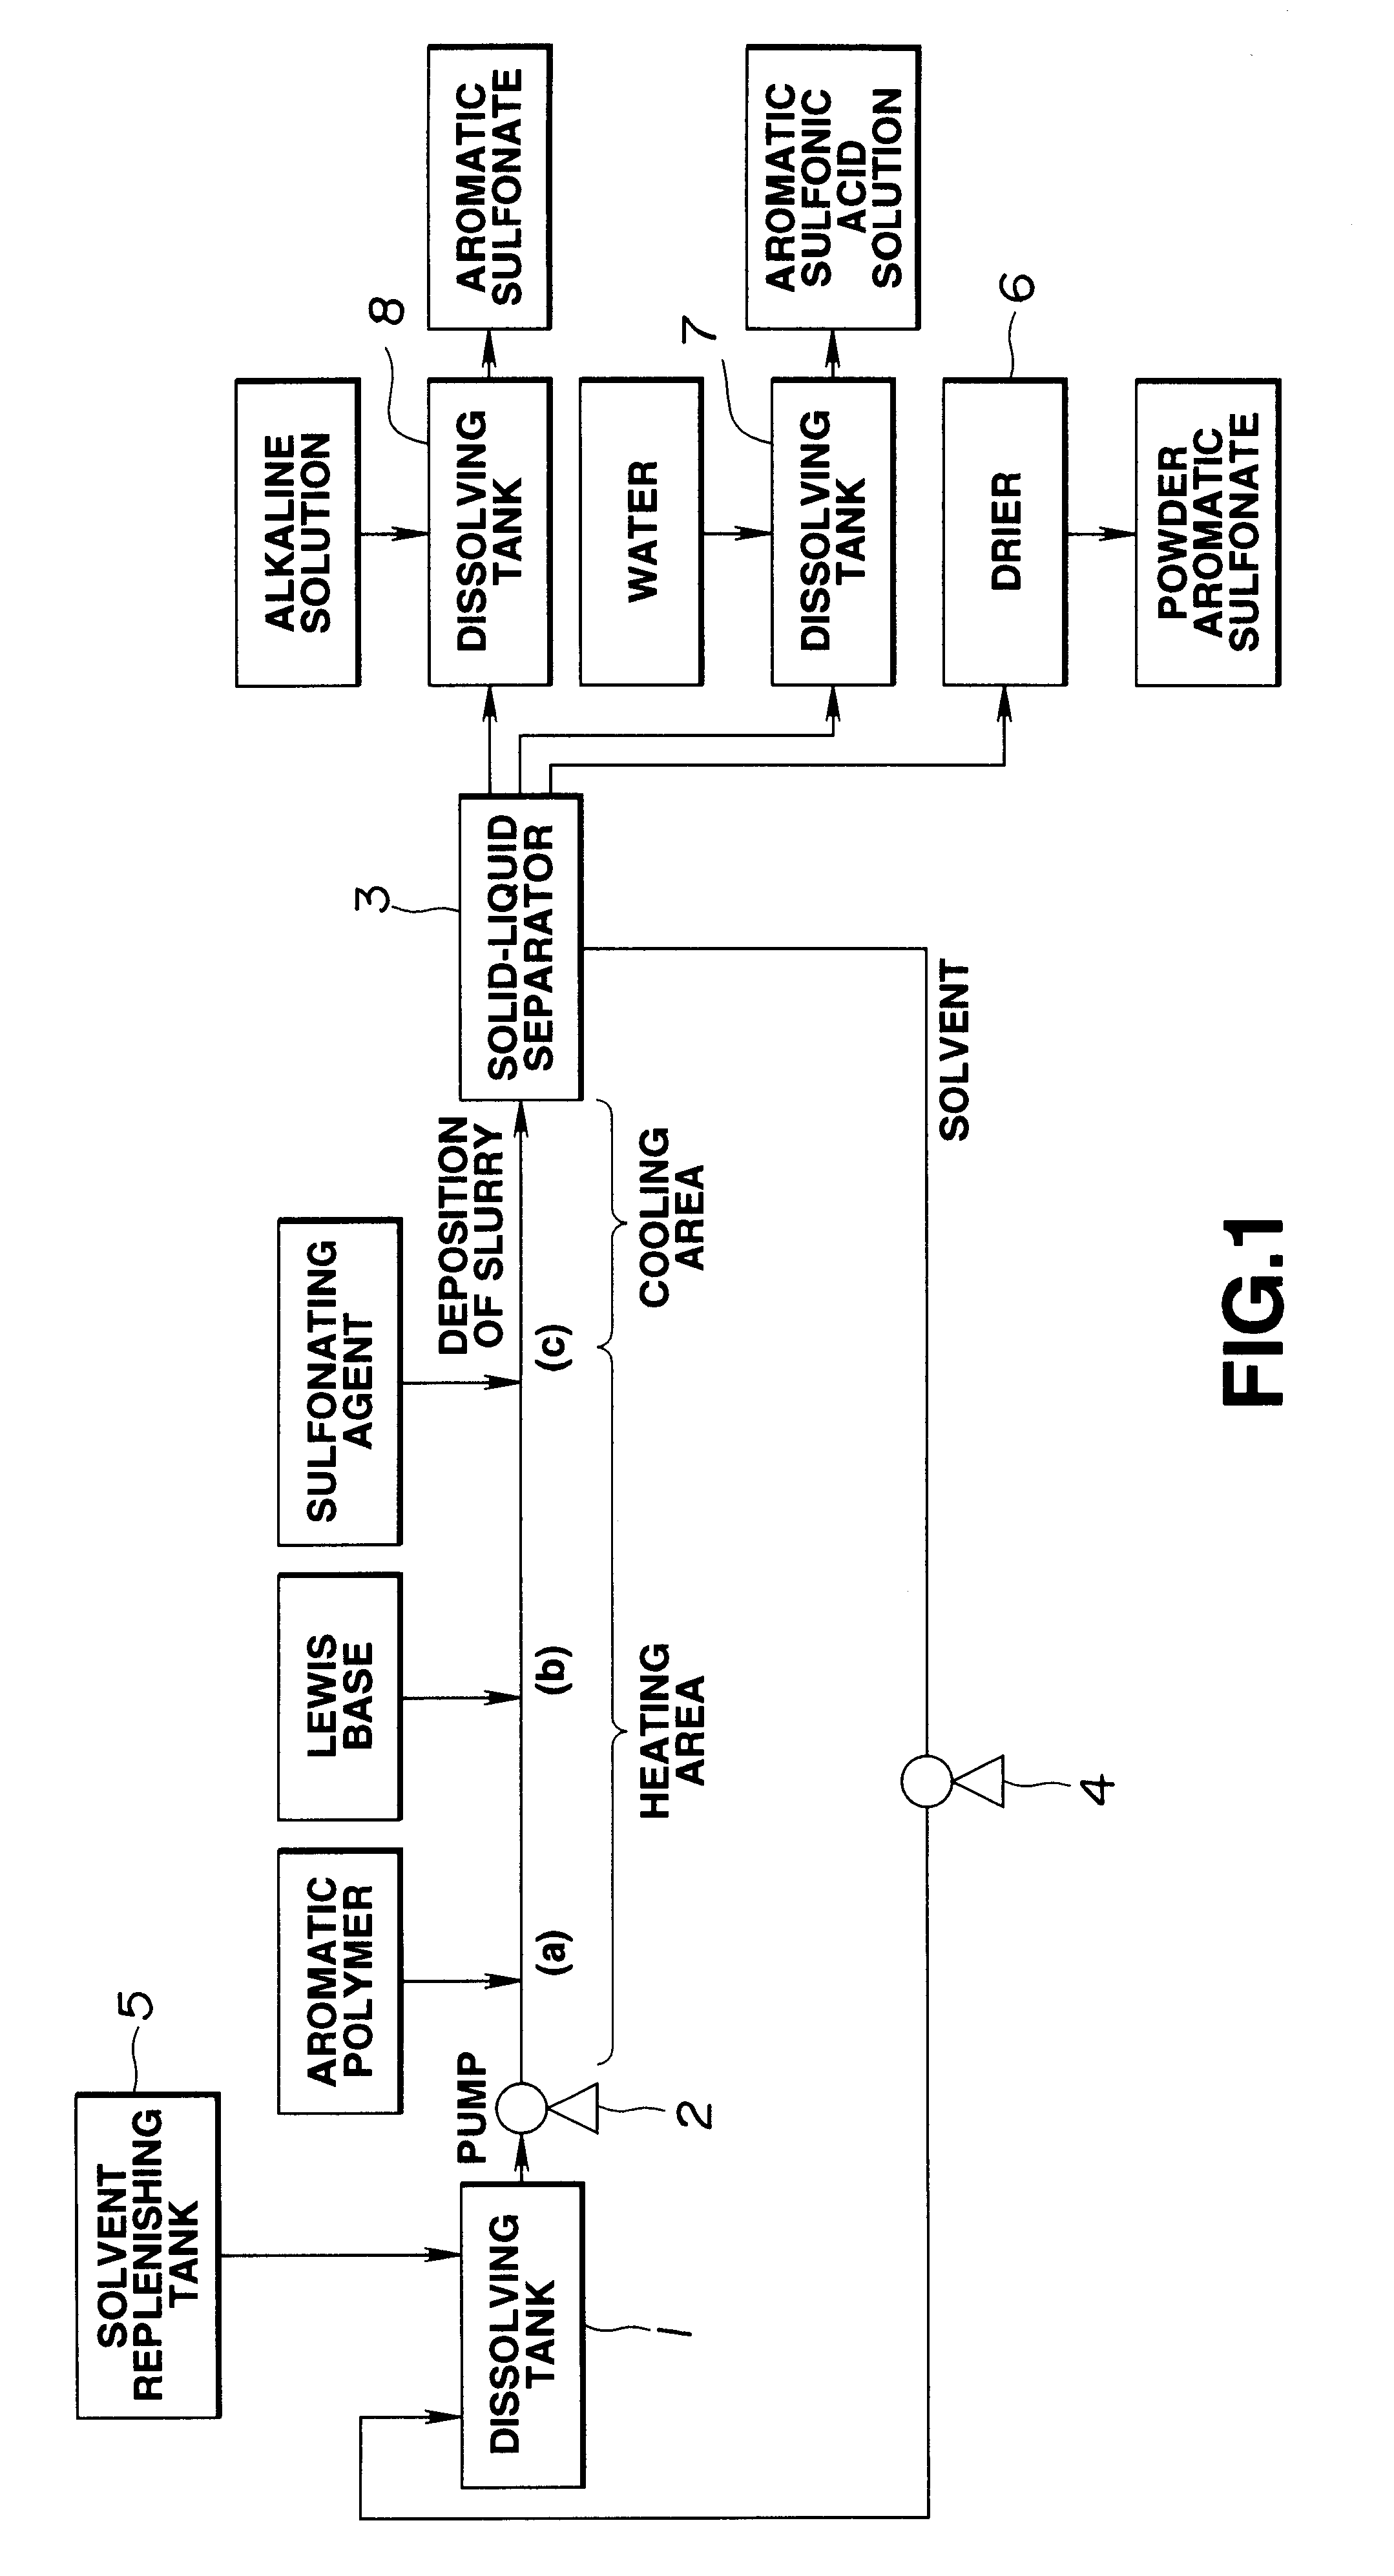 Method of manufacturing polyelectrolyte from styrene polymers